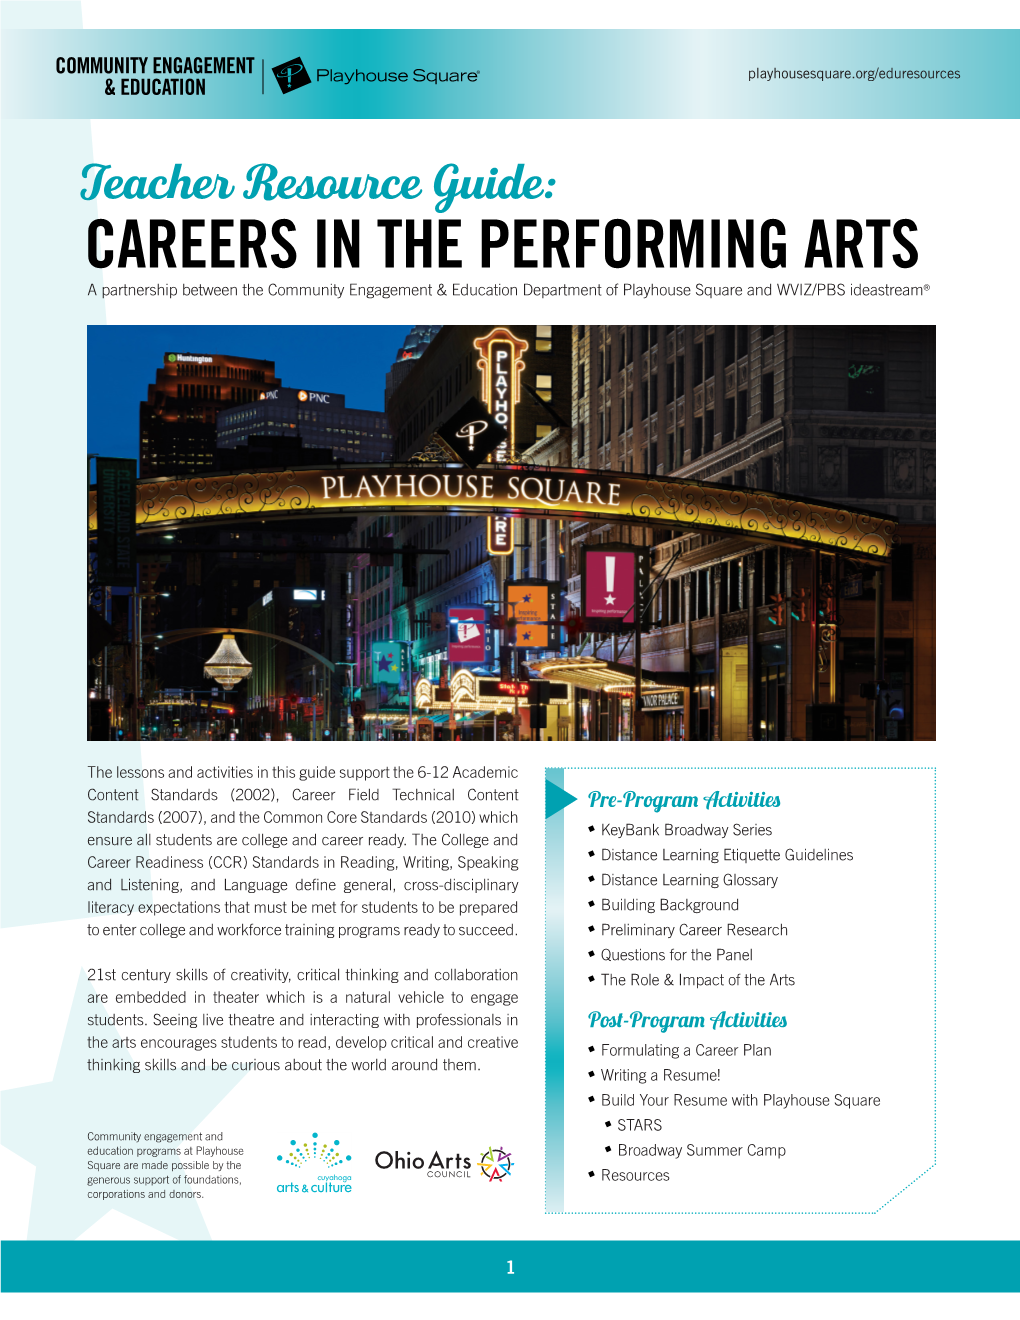 CAREERS in the PERFORMING ARTS a Partnership Between the Community Engagement & Education Department of Playhouse Square and WVIZ/PBS Ideastream®